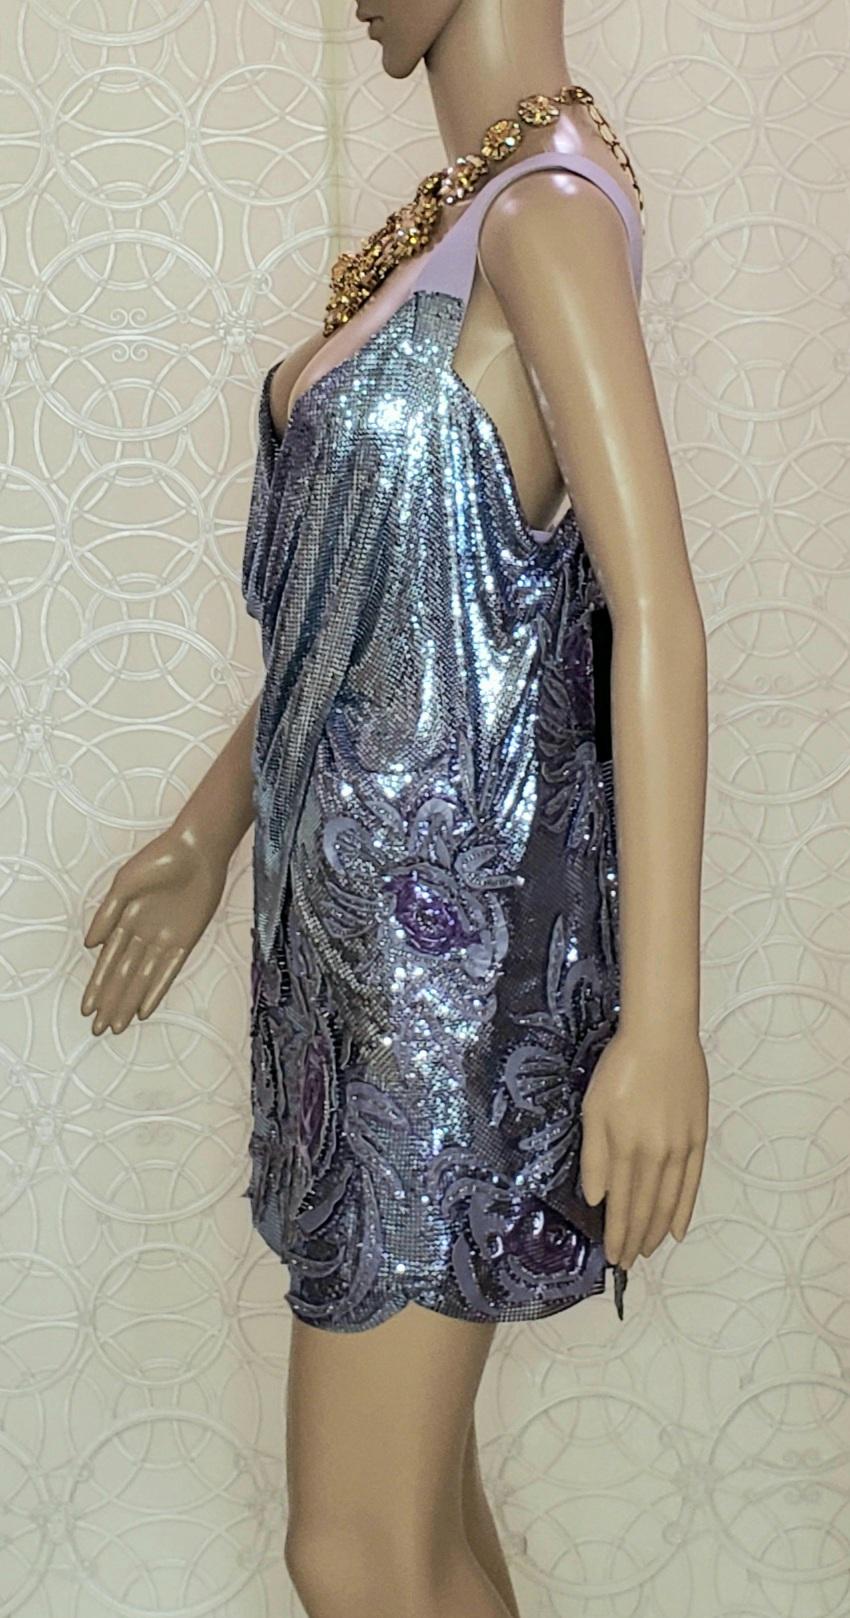 S/S 14 L#42 VERSACE METAL MESH CRYSTAL EMBELLISHED TOP and SKIRT SET SZ IT 38-2 In New Condition For Sale In Montgomery, TX